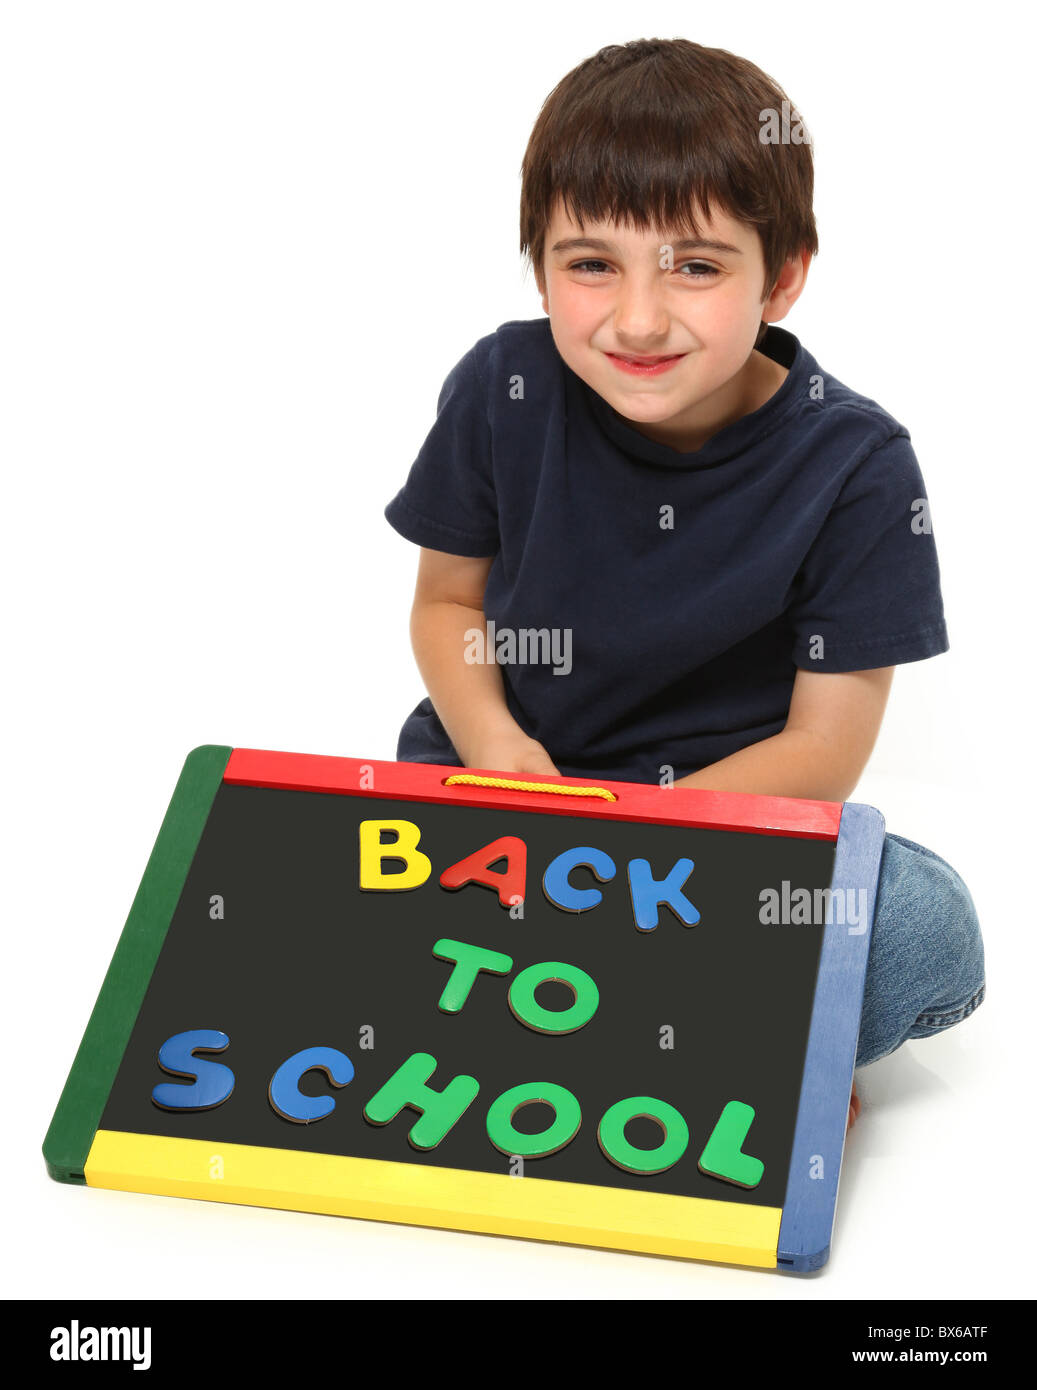 adorable seven year old boy holding back to school chalk board Stock Photo